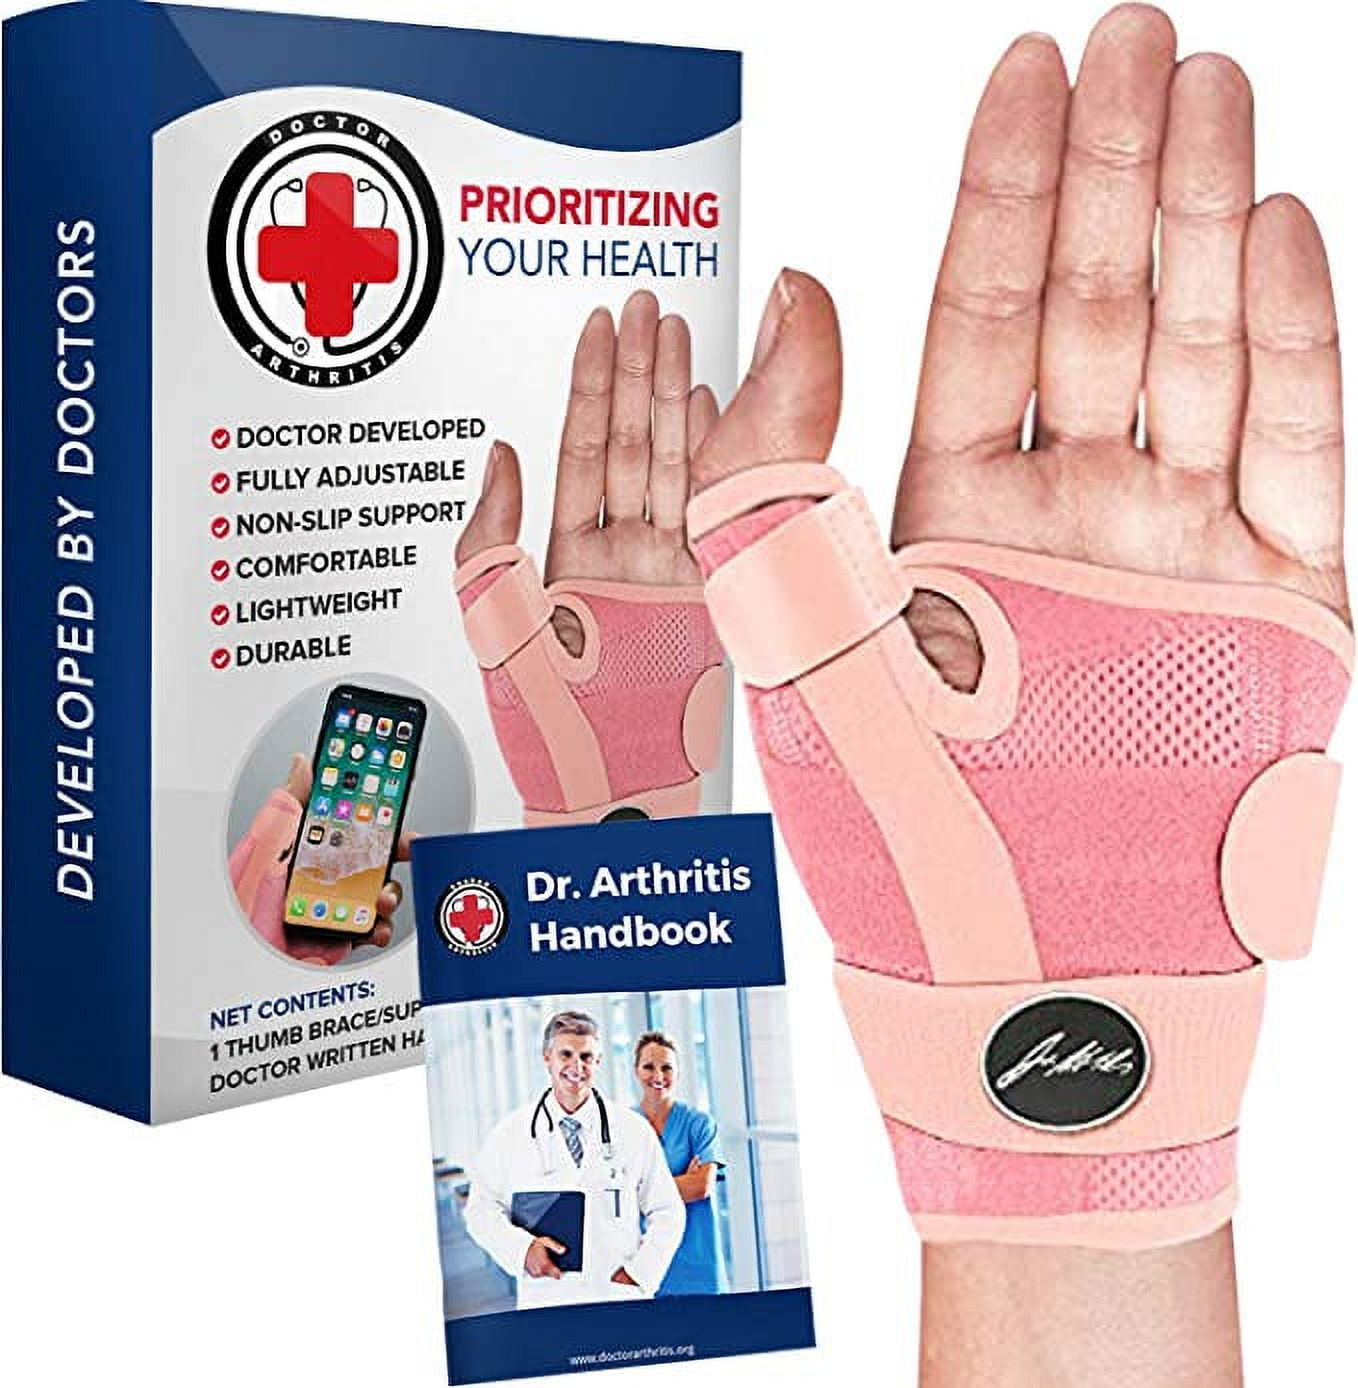 17 Gifts for People with Arthritis